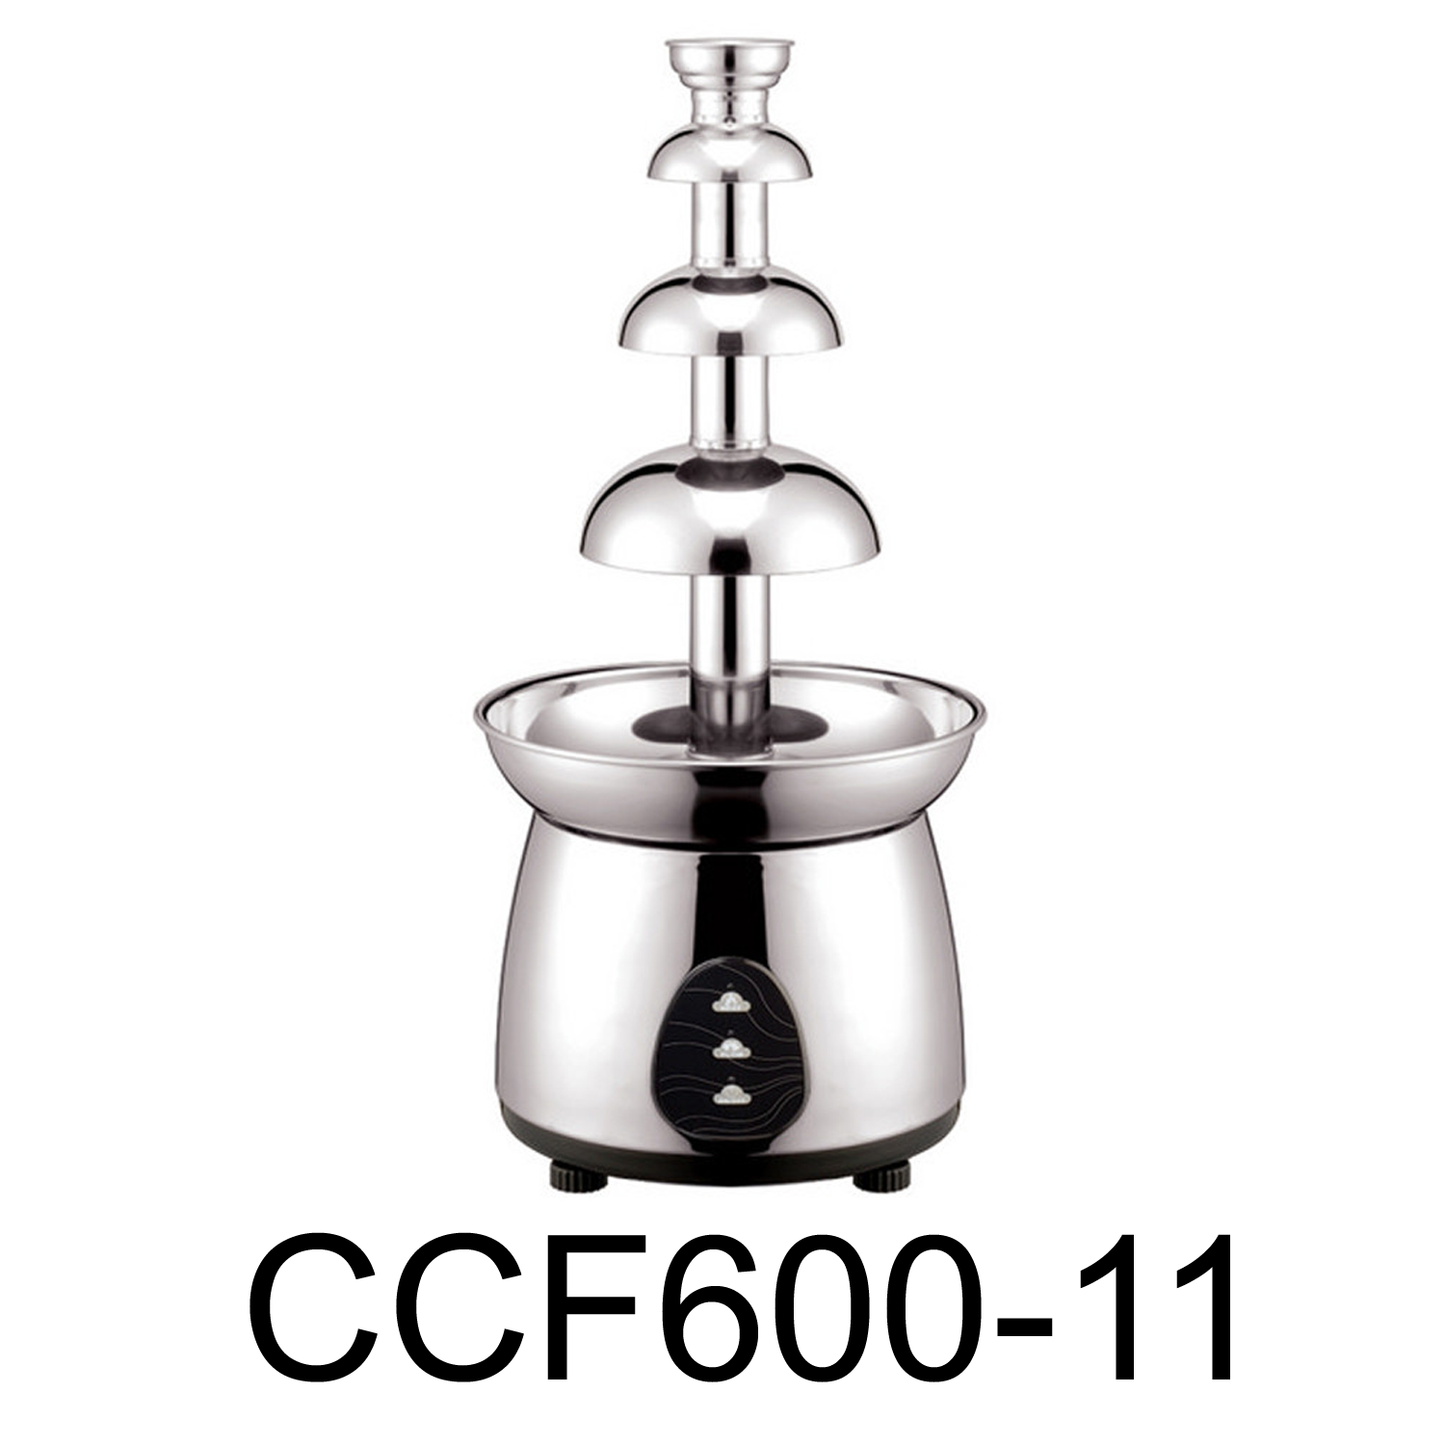 4 Tier Stainless Steel Electric Chocolate Fondue Fountain